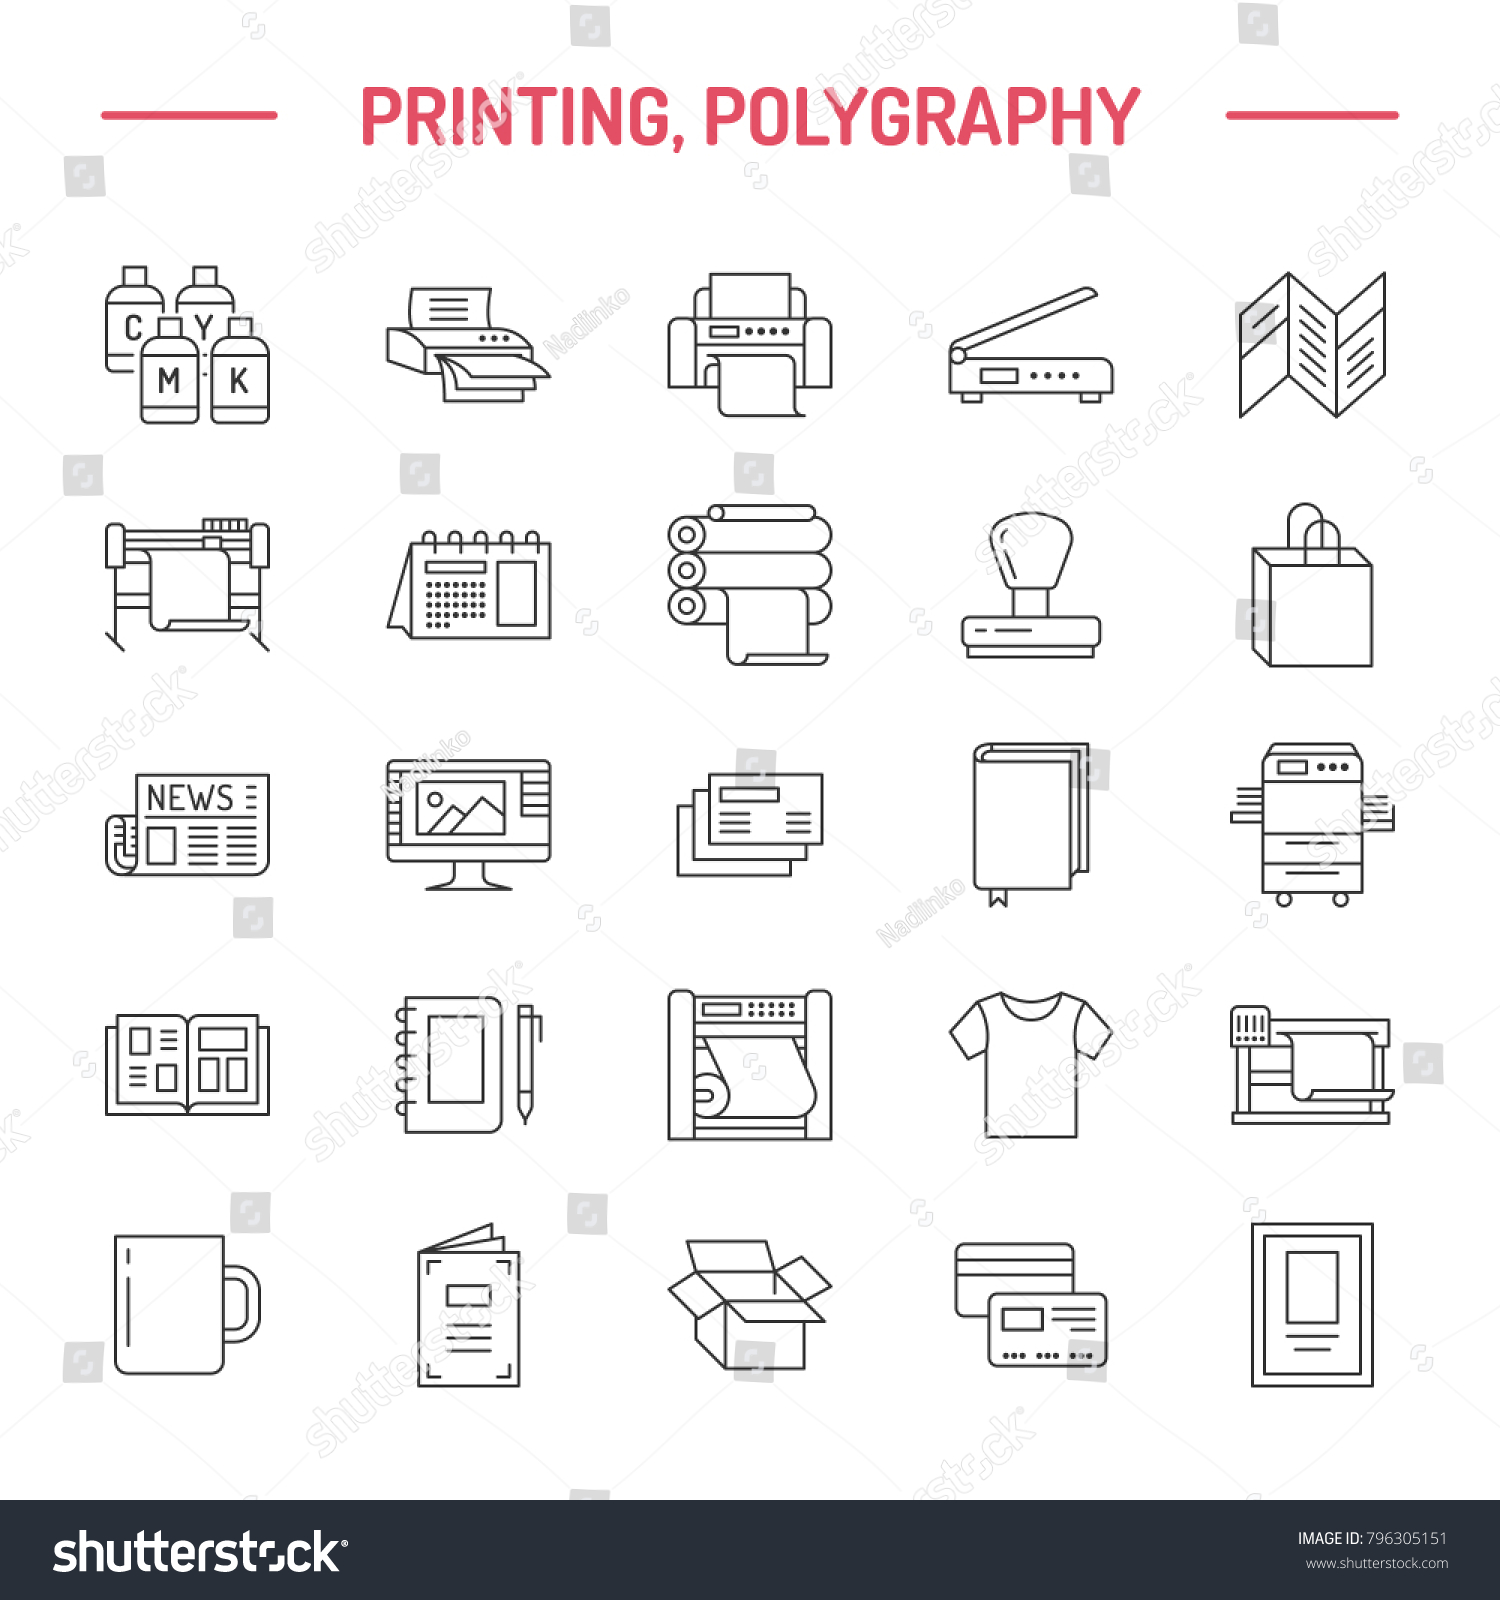 SVG of Printing house flat line icons. Print shop equipment - printer, scanner, offset machine, plotter, brochure, rubber stamp. Thin linear signs for polygraphy office, typography. svg